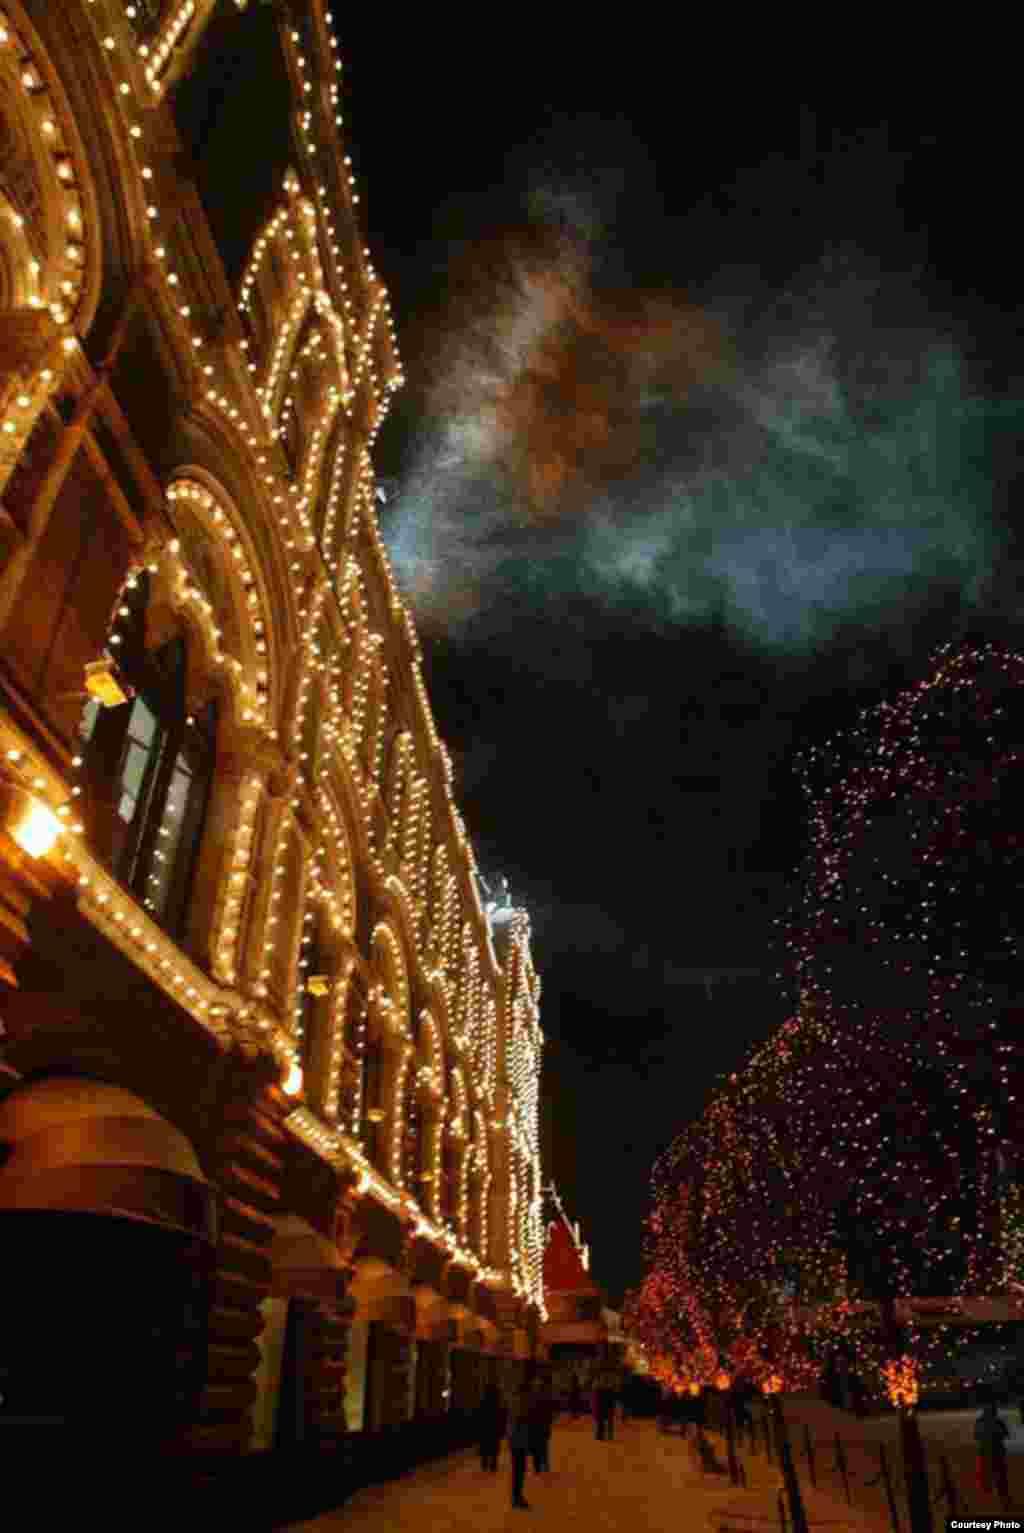 The winter sky is illuminated over Red Square in Moscow. - Photo by Aleksei Sazonov for RFE/RL